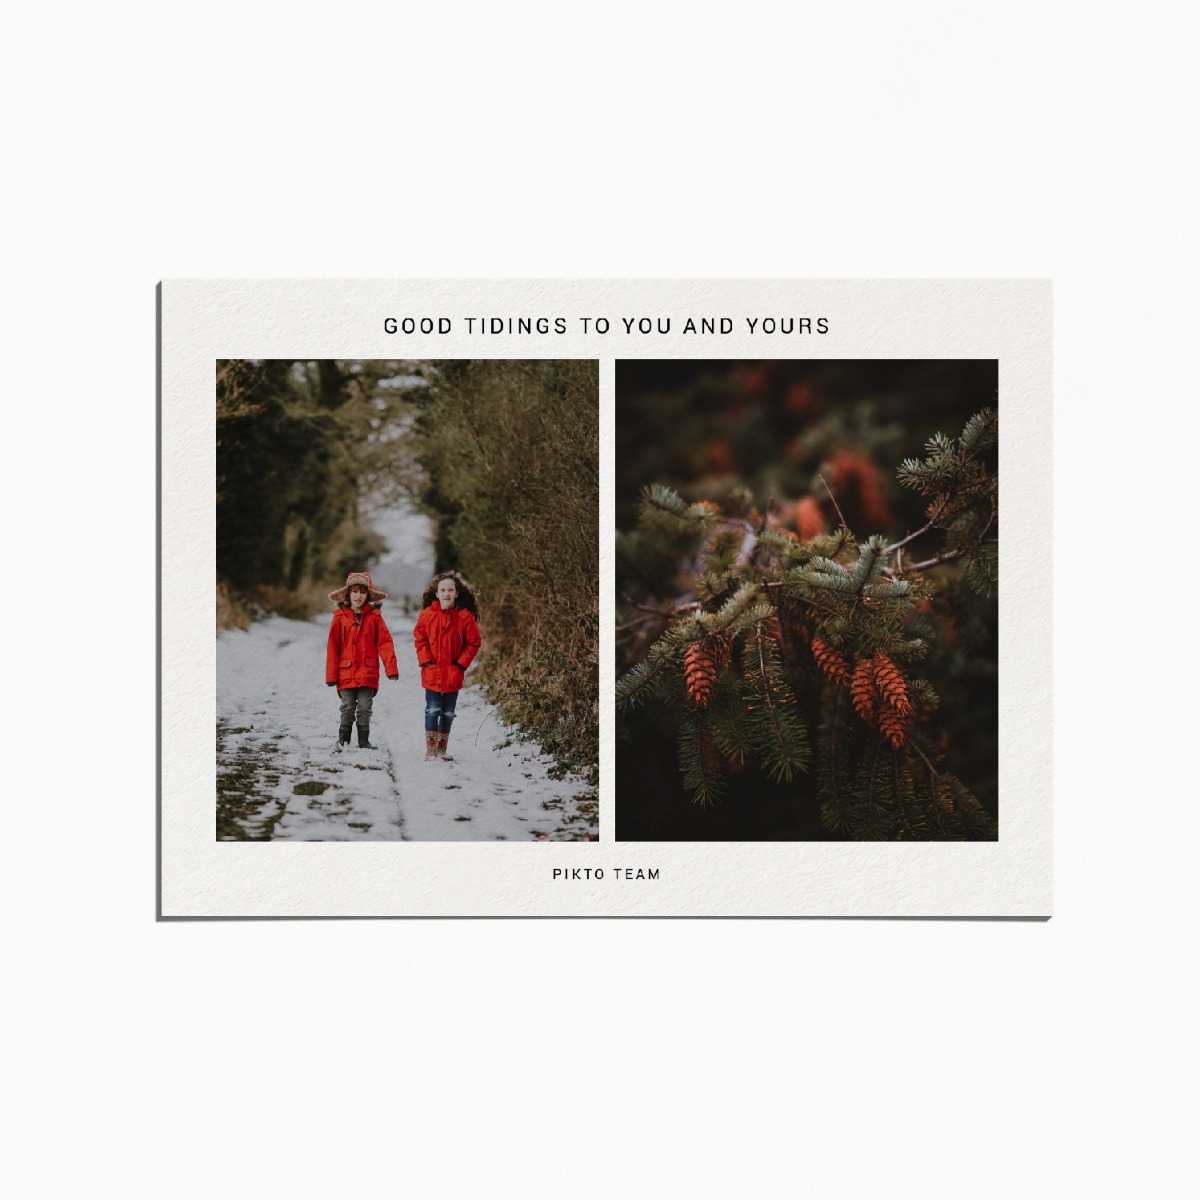 Holiday card with an image of two siblings outdoors wearing red coats, and another image of a pinecone